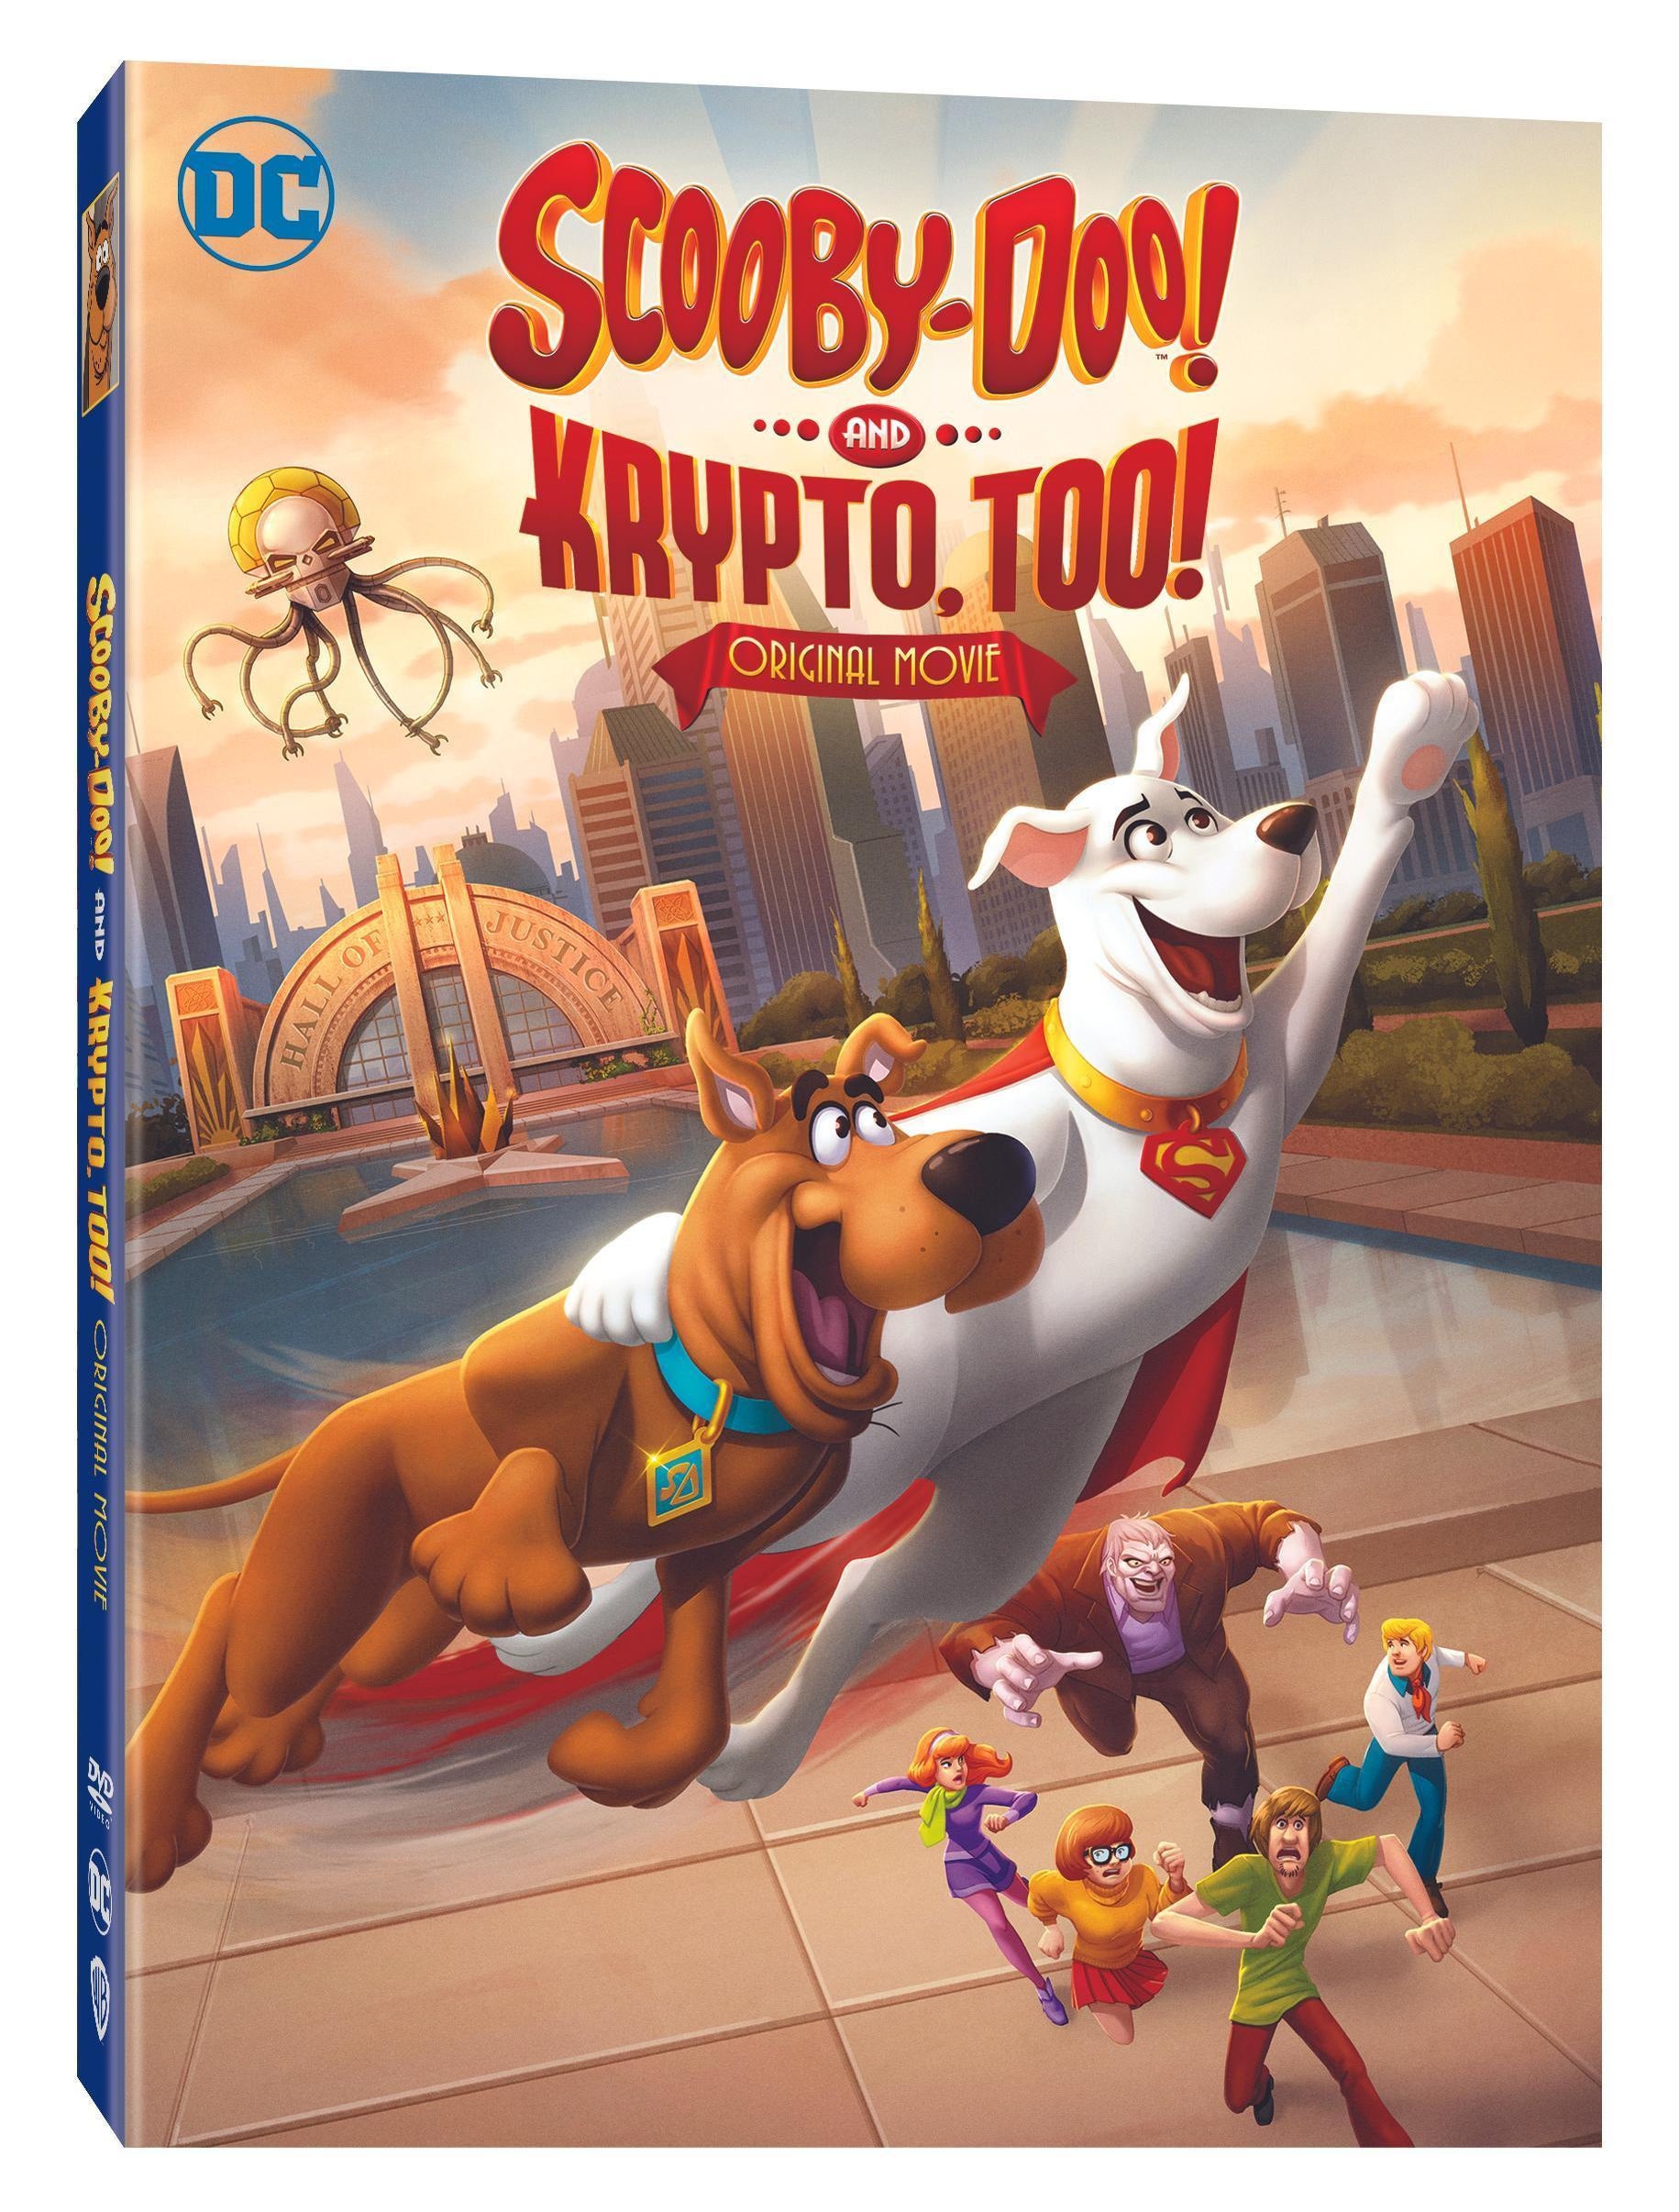 ScoobyDoo! and Krypto, Too Release Date Announced